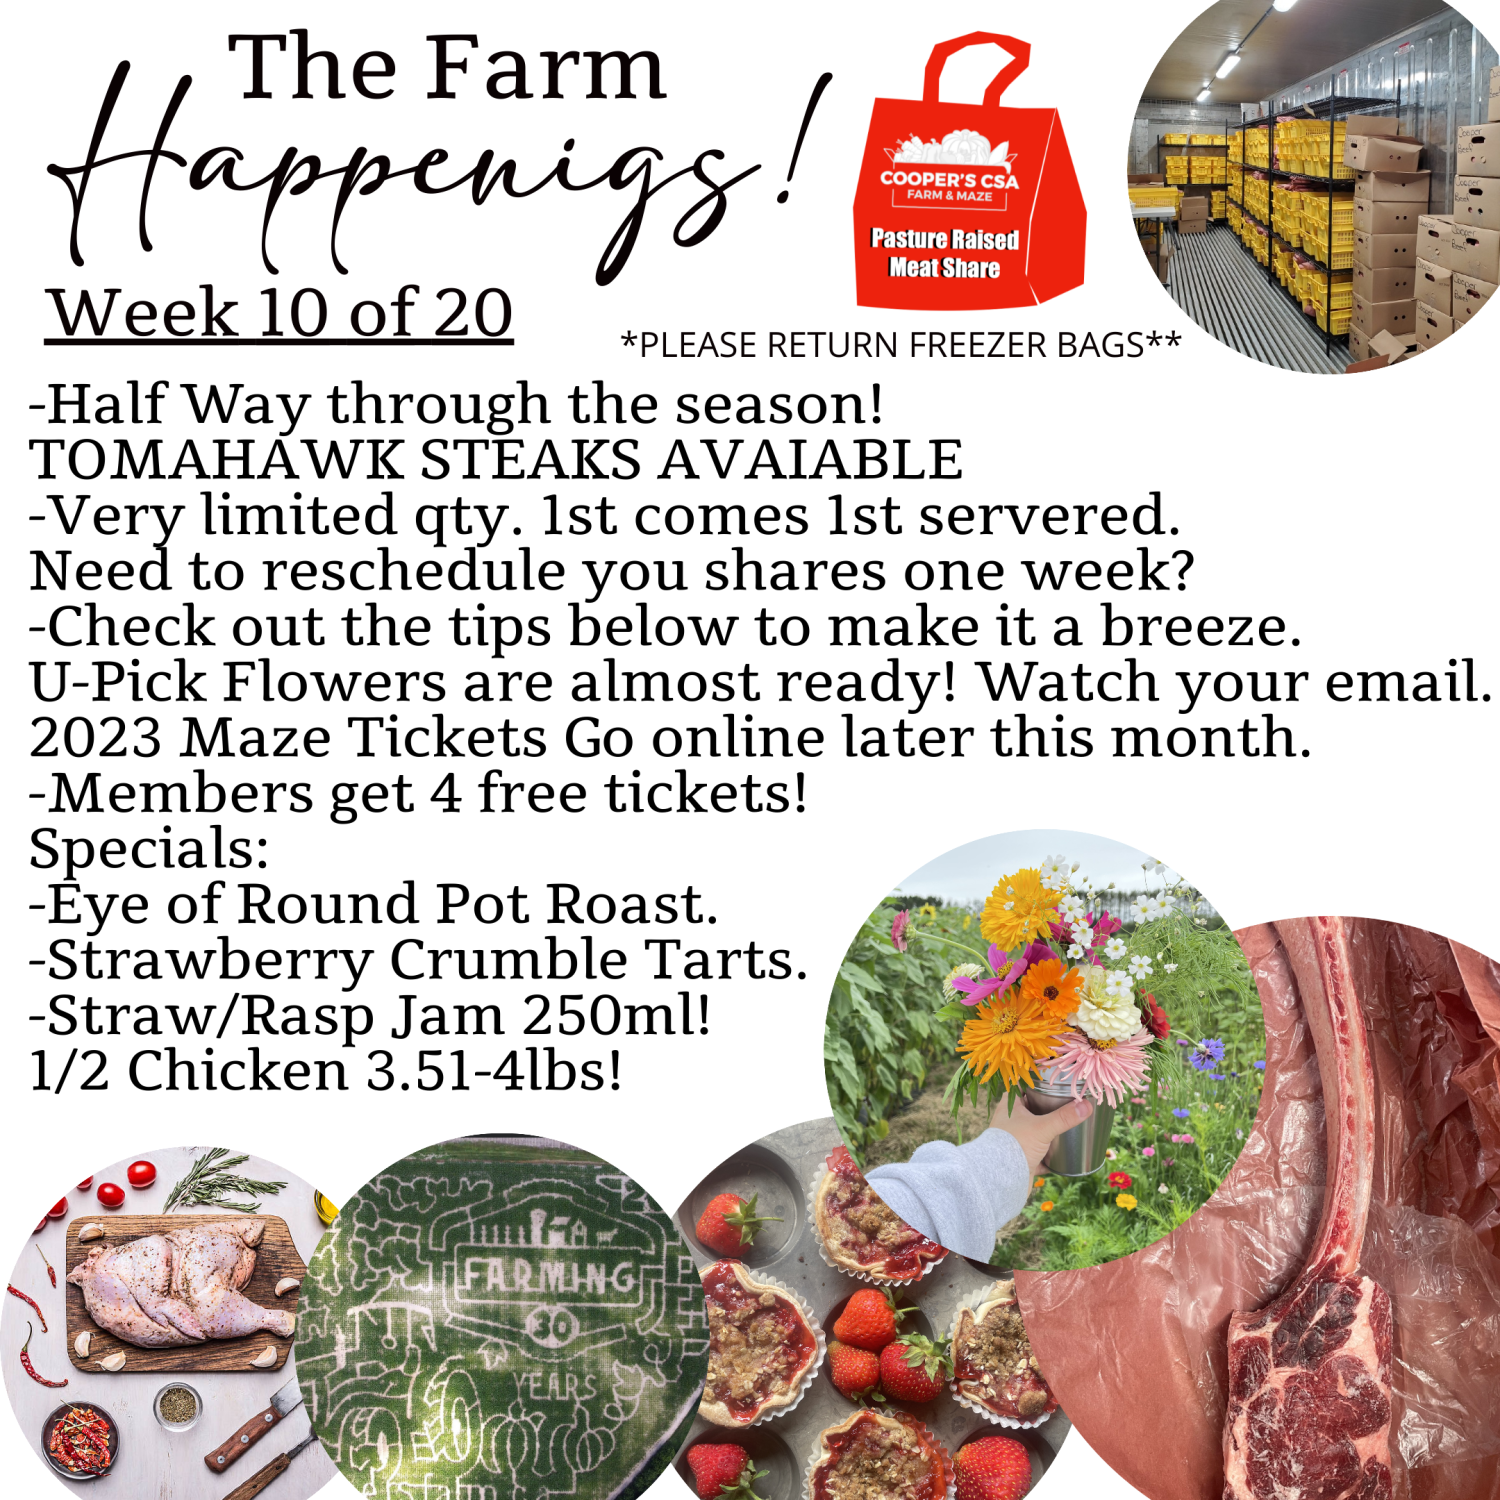 Previous Happening: "Pasture Meat Shares"-Coopers CSA Farm Farm Happenings Week 10